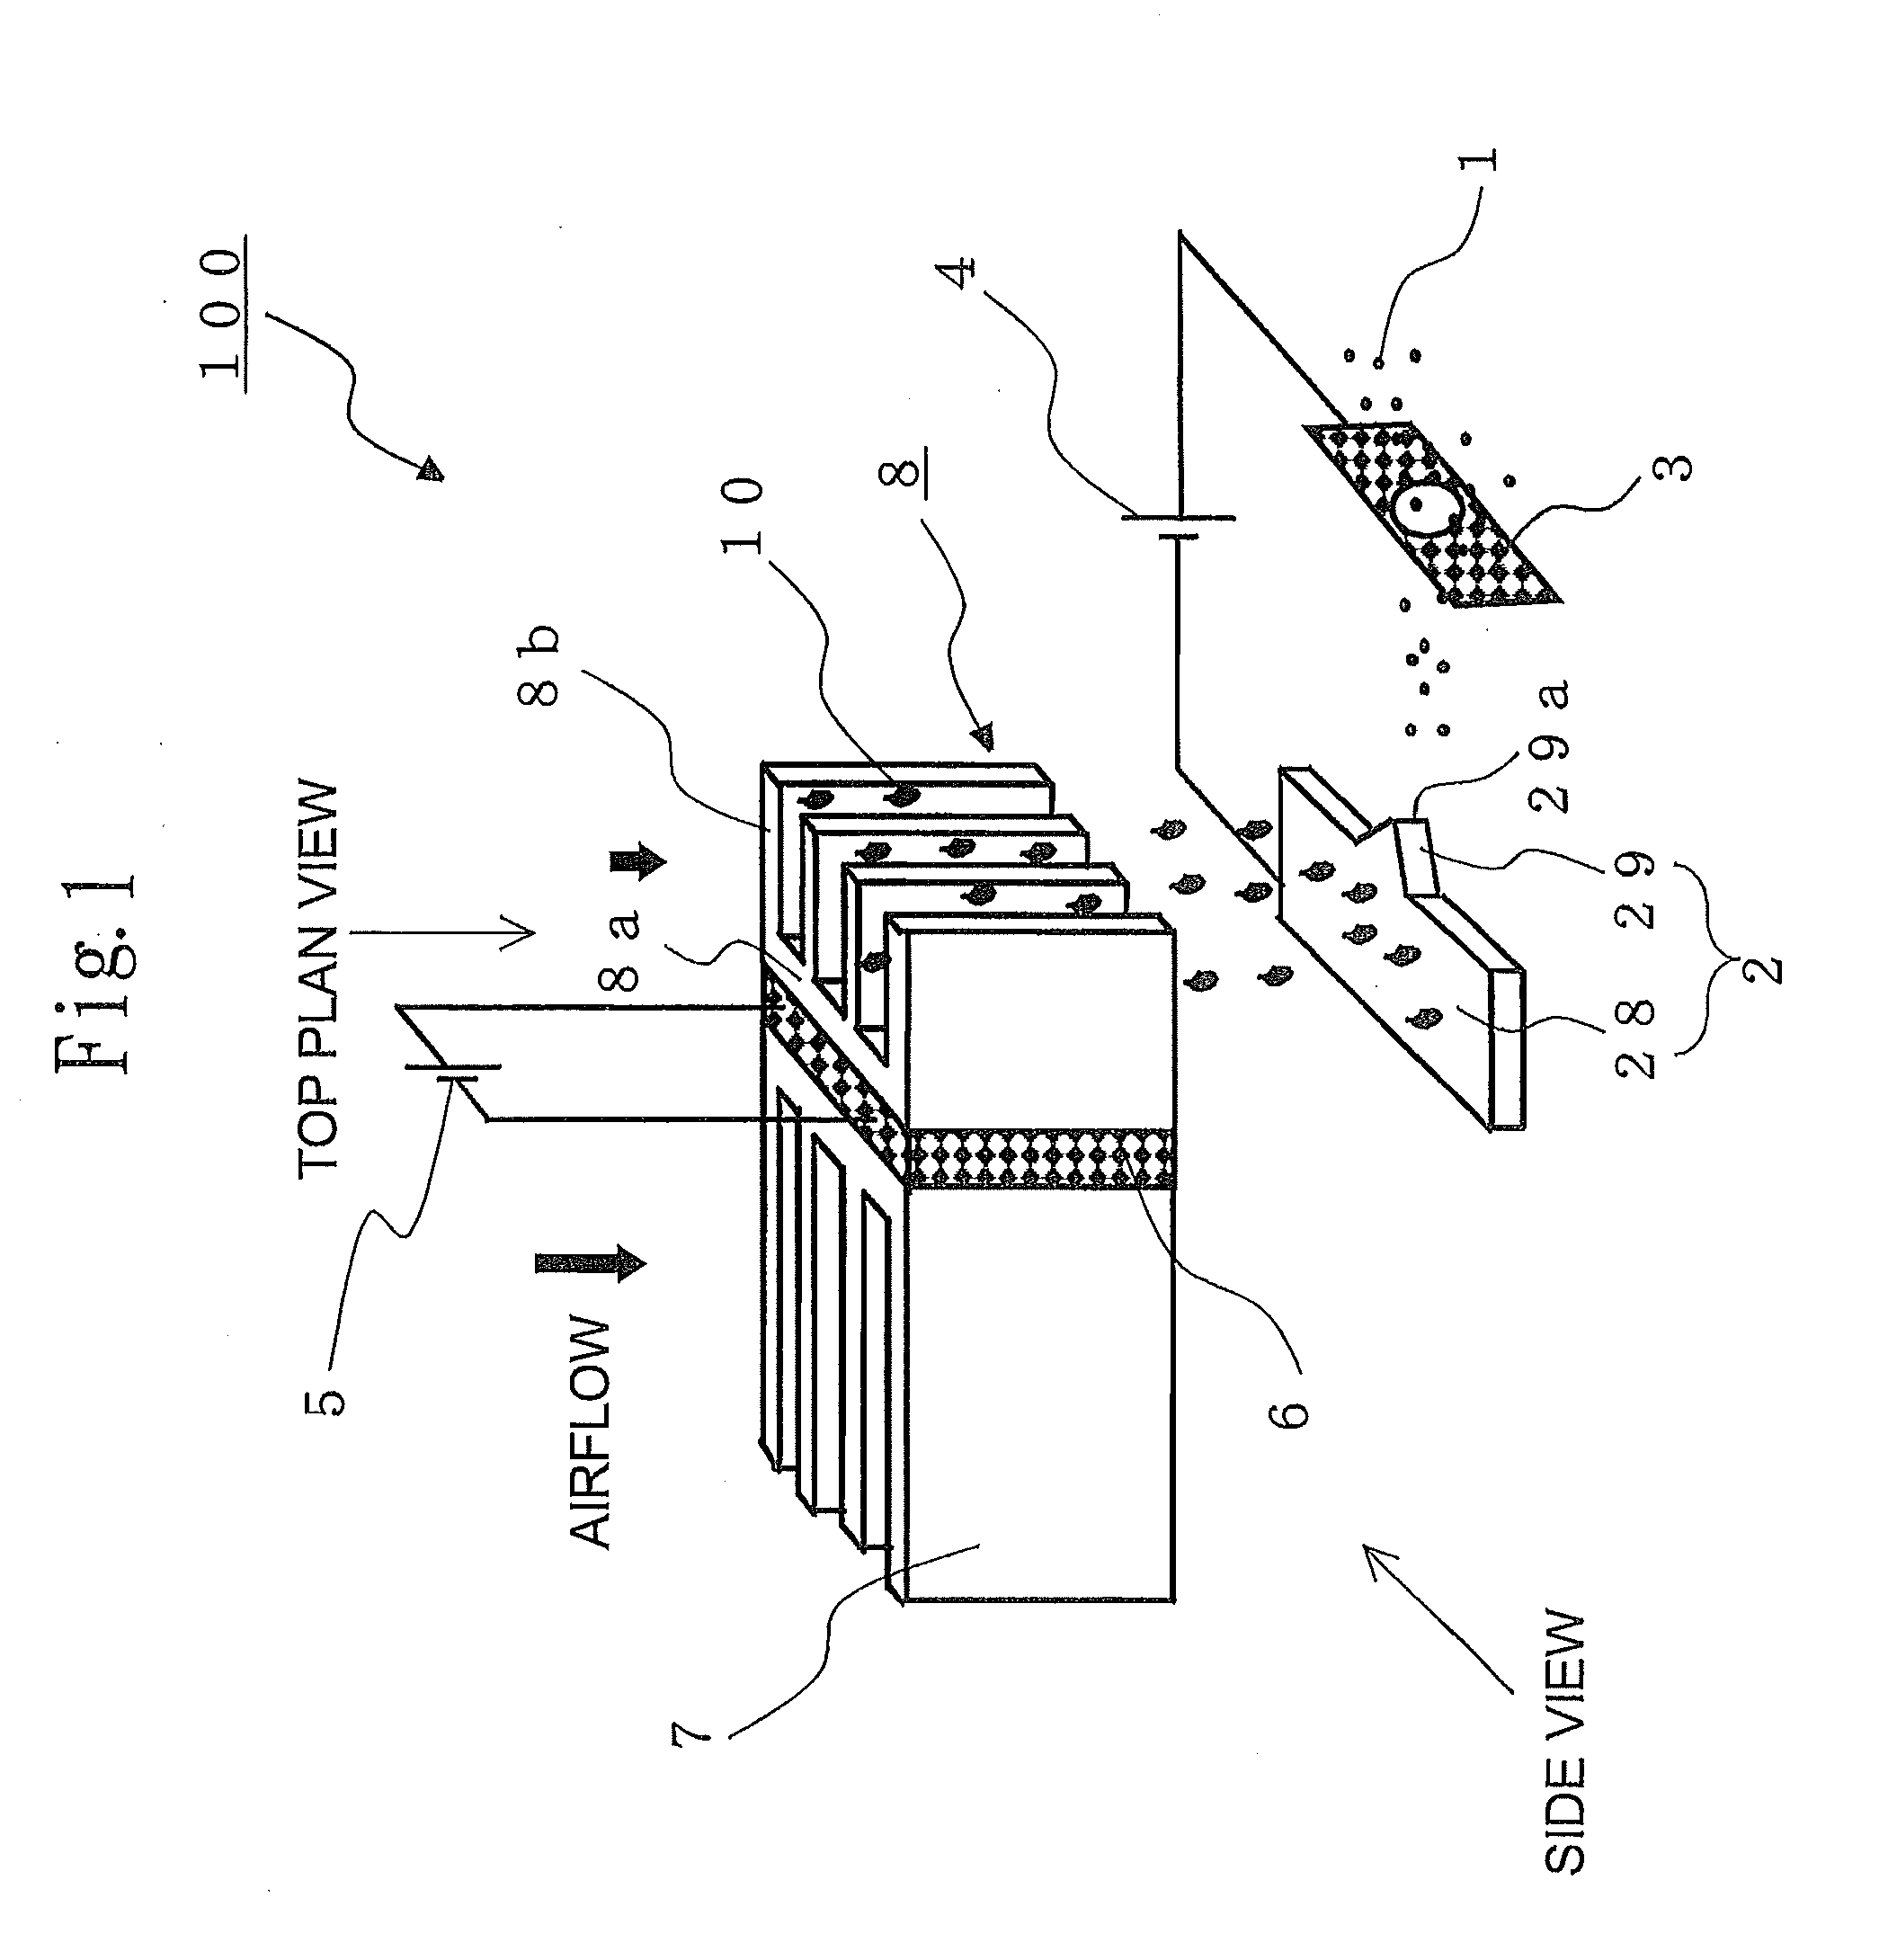 Electrostatic atomizer and air conditioner